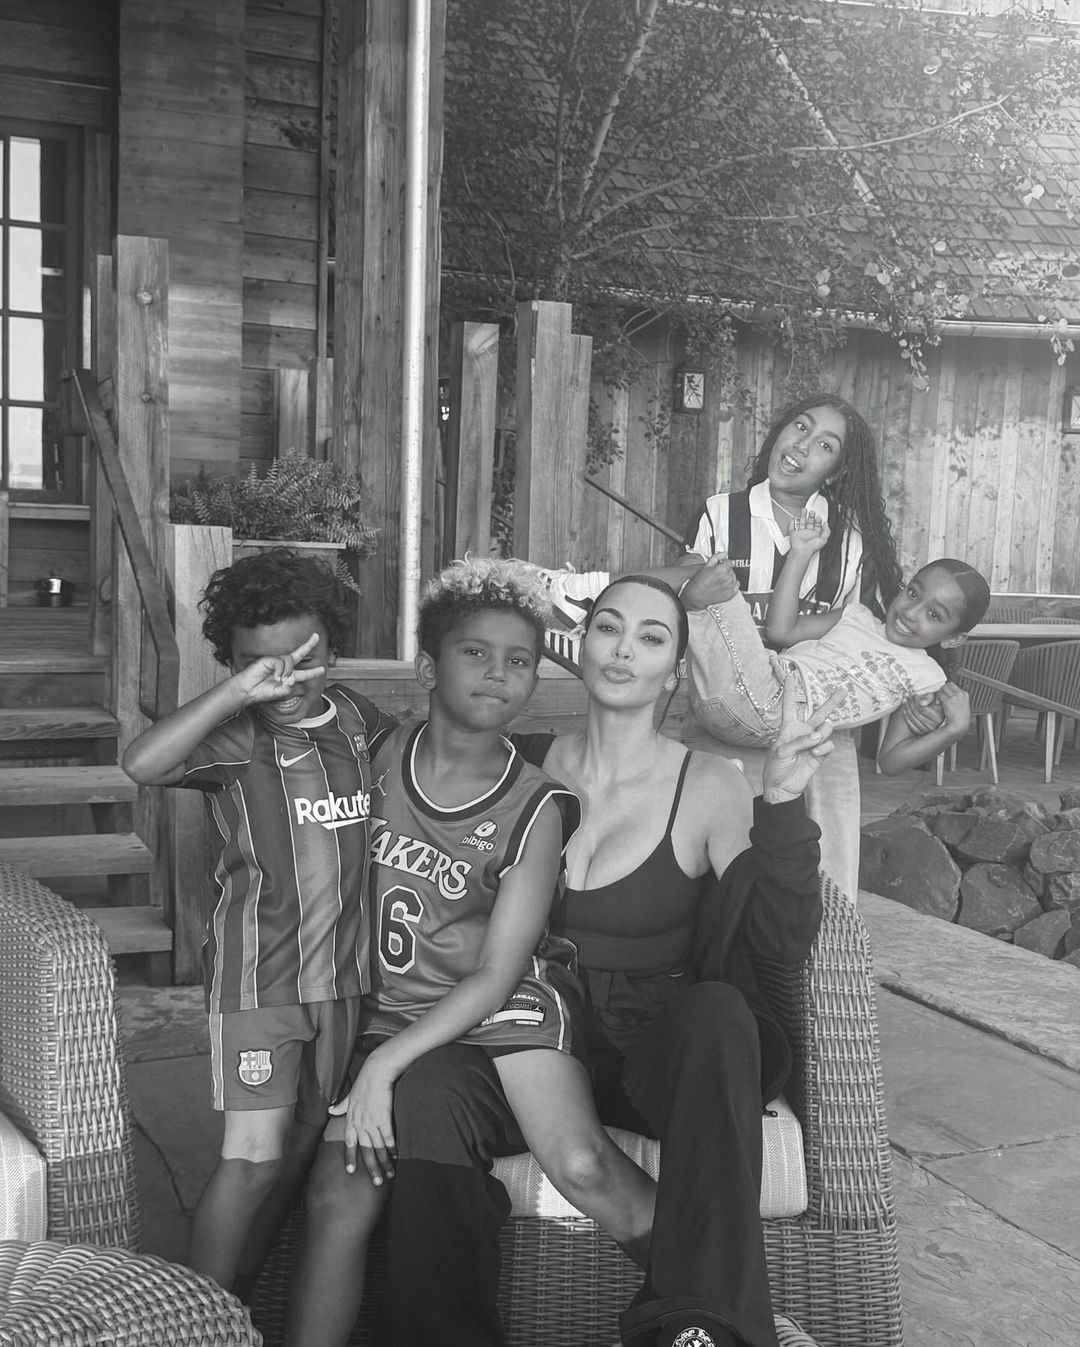 Kim Kardashian with her four children: North, Saint, Chicago, and Psalm during a family vacation